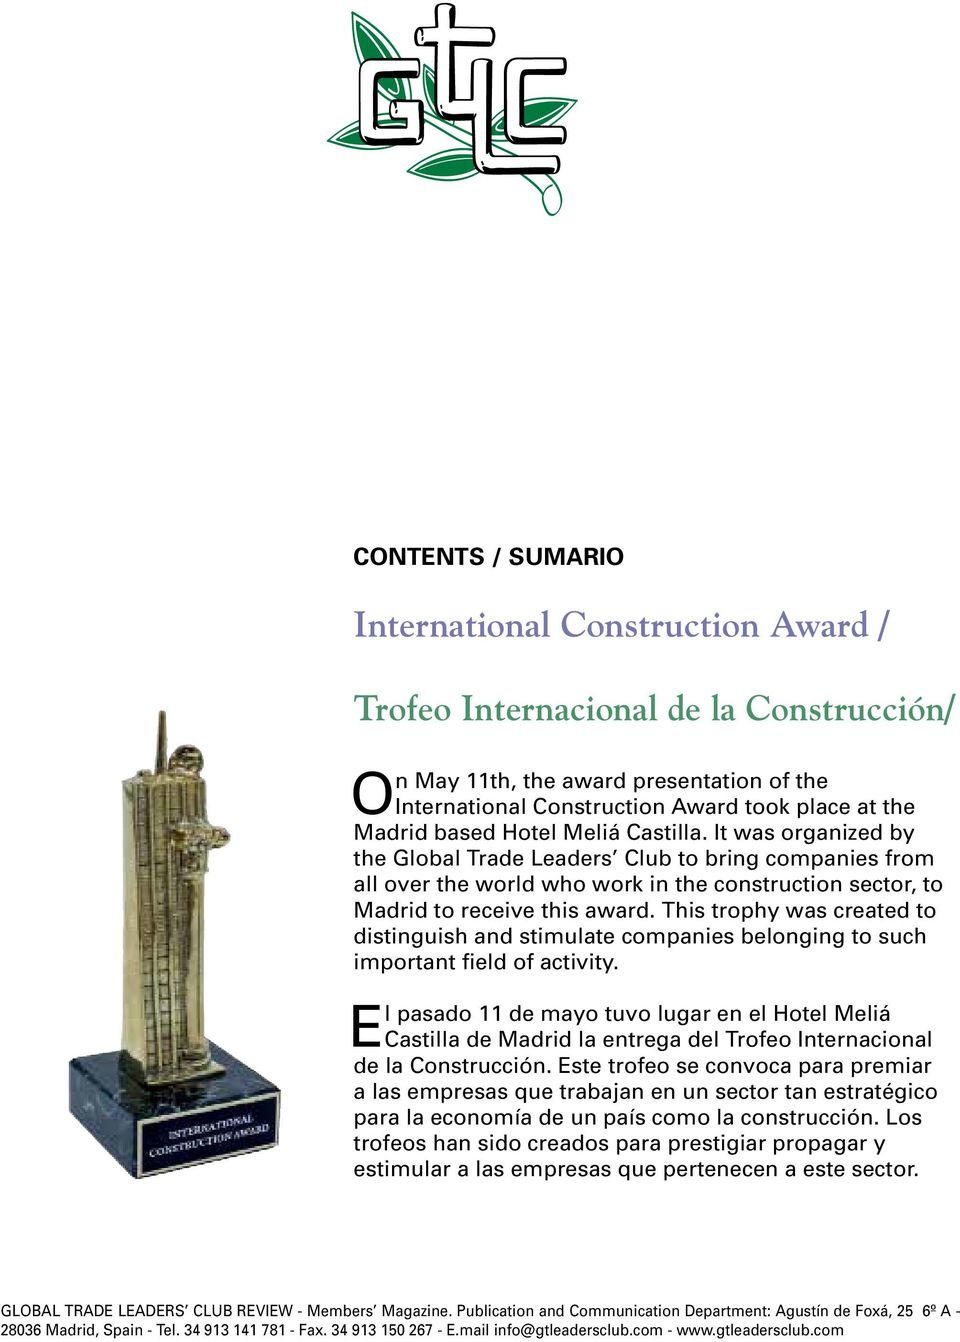 This trophy was created to distinguish and stimulate companies belonging to such important field of activity.